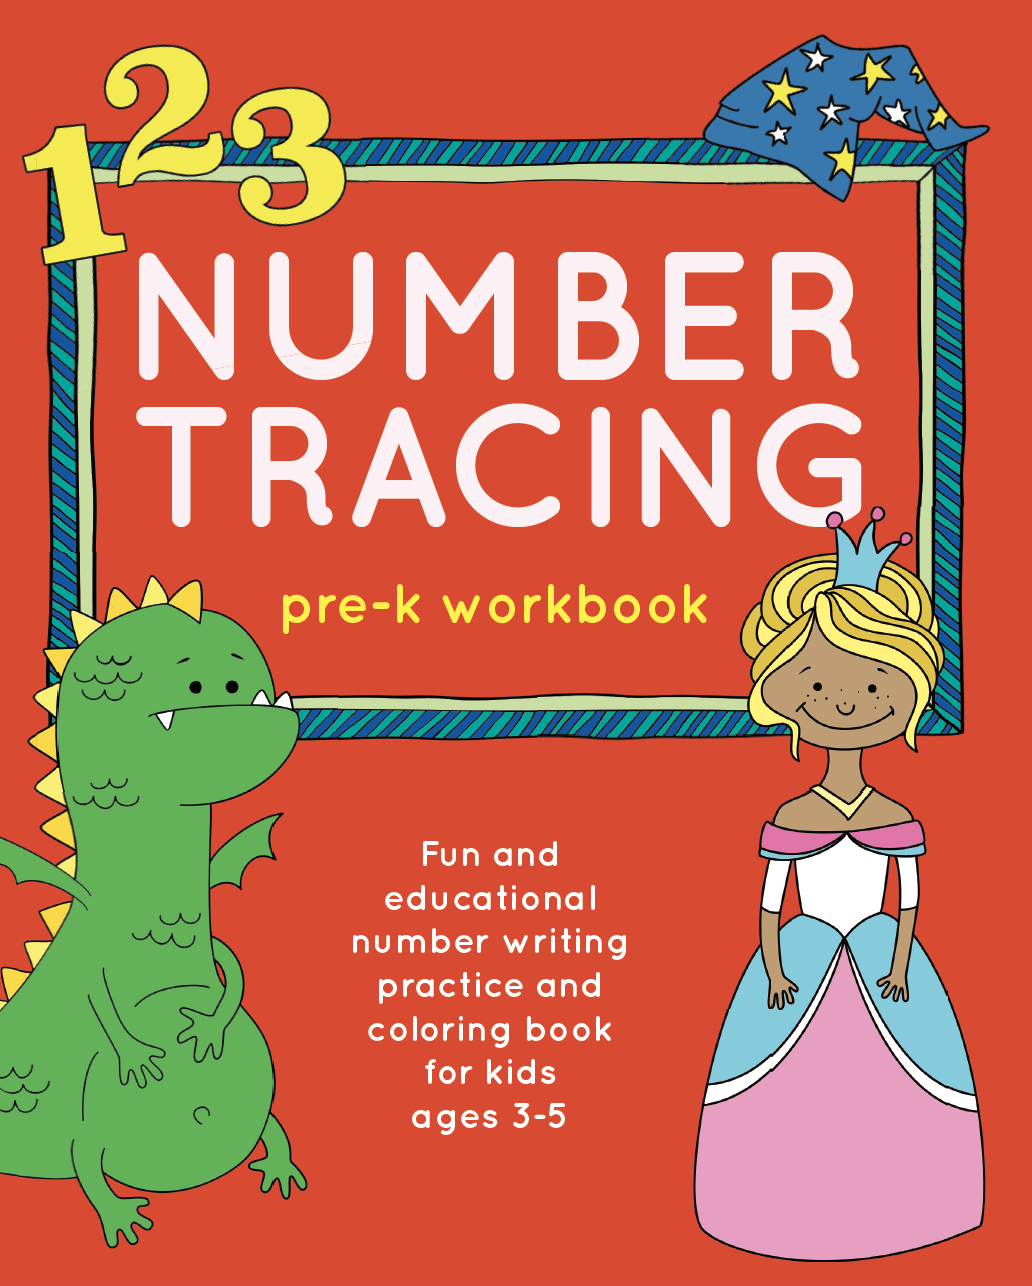 Pre-K　Workbook　Brown　Number　Editors　Book　Hachette　of　Tracing　Lab　Group　by　Little